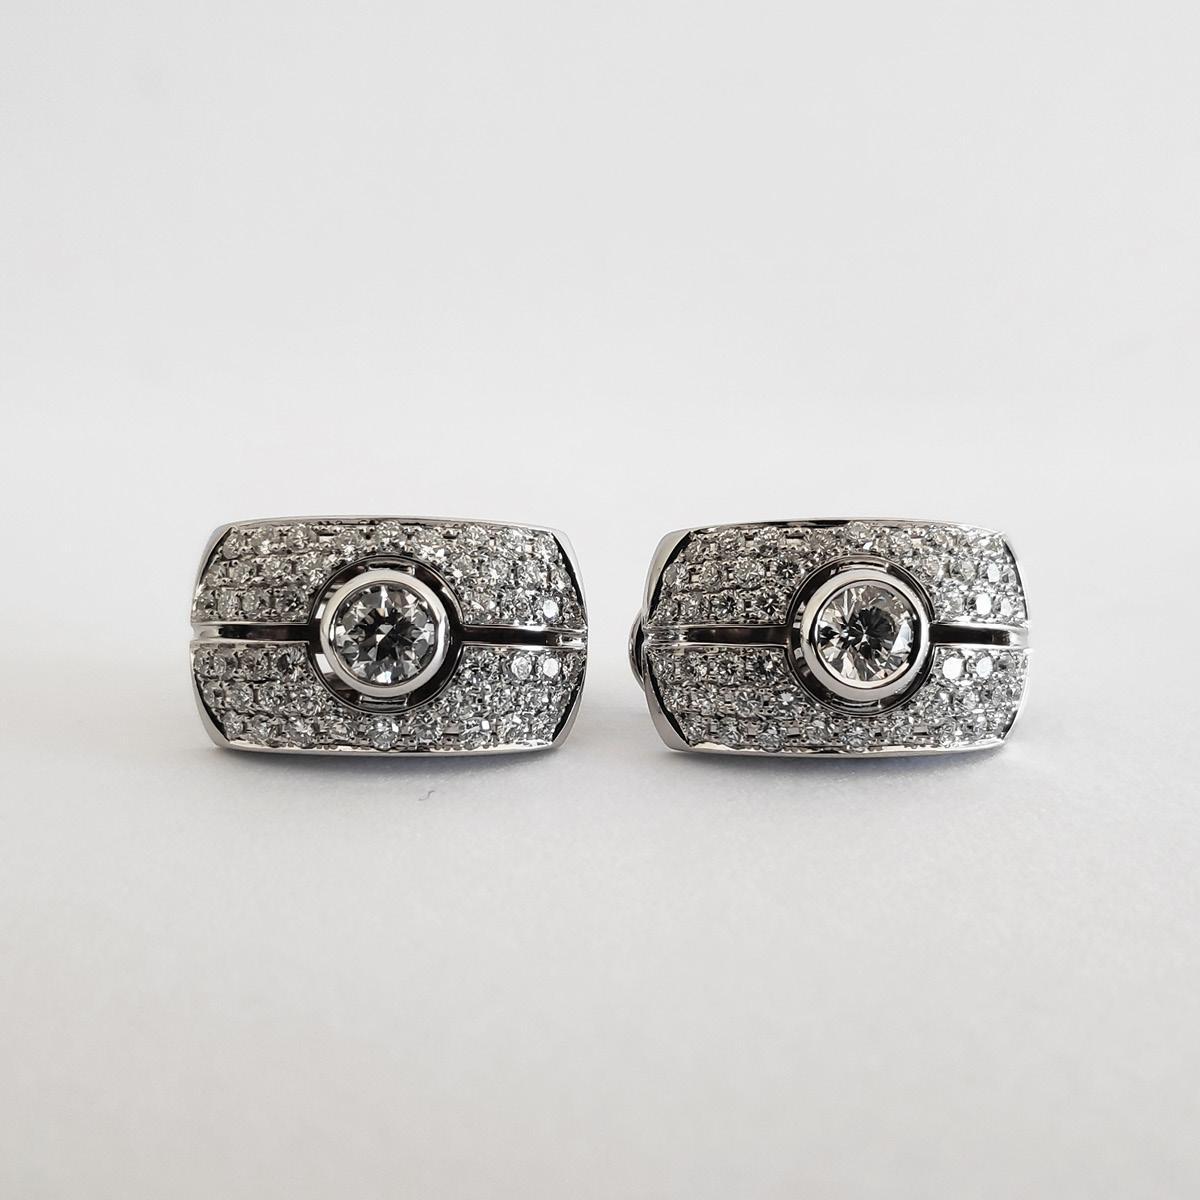 These omega clip earrings exhibit 1.75 carats total weight of dazzling pave setting diamonds and two brilliant cut diamonds, all mounted on 19.2K white gold. 

This piece are part of Monseo 'Eternal Collection' which is a collection that privileges